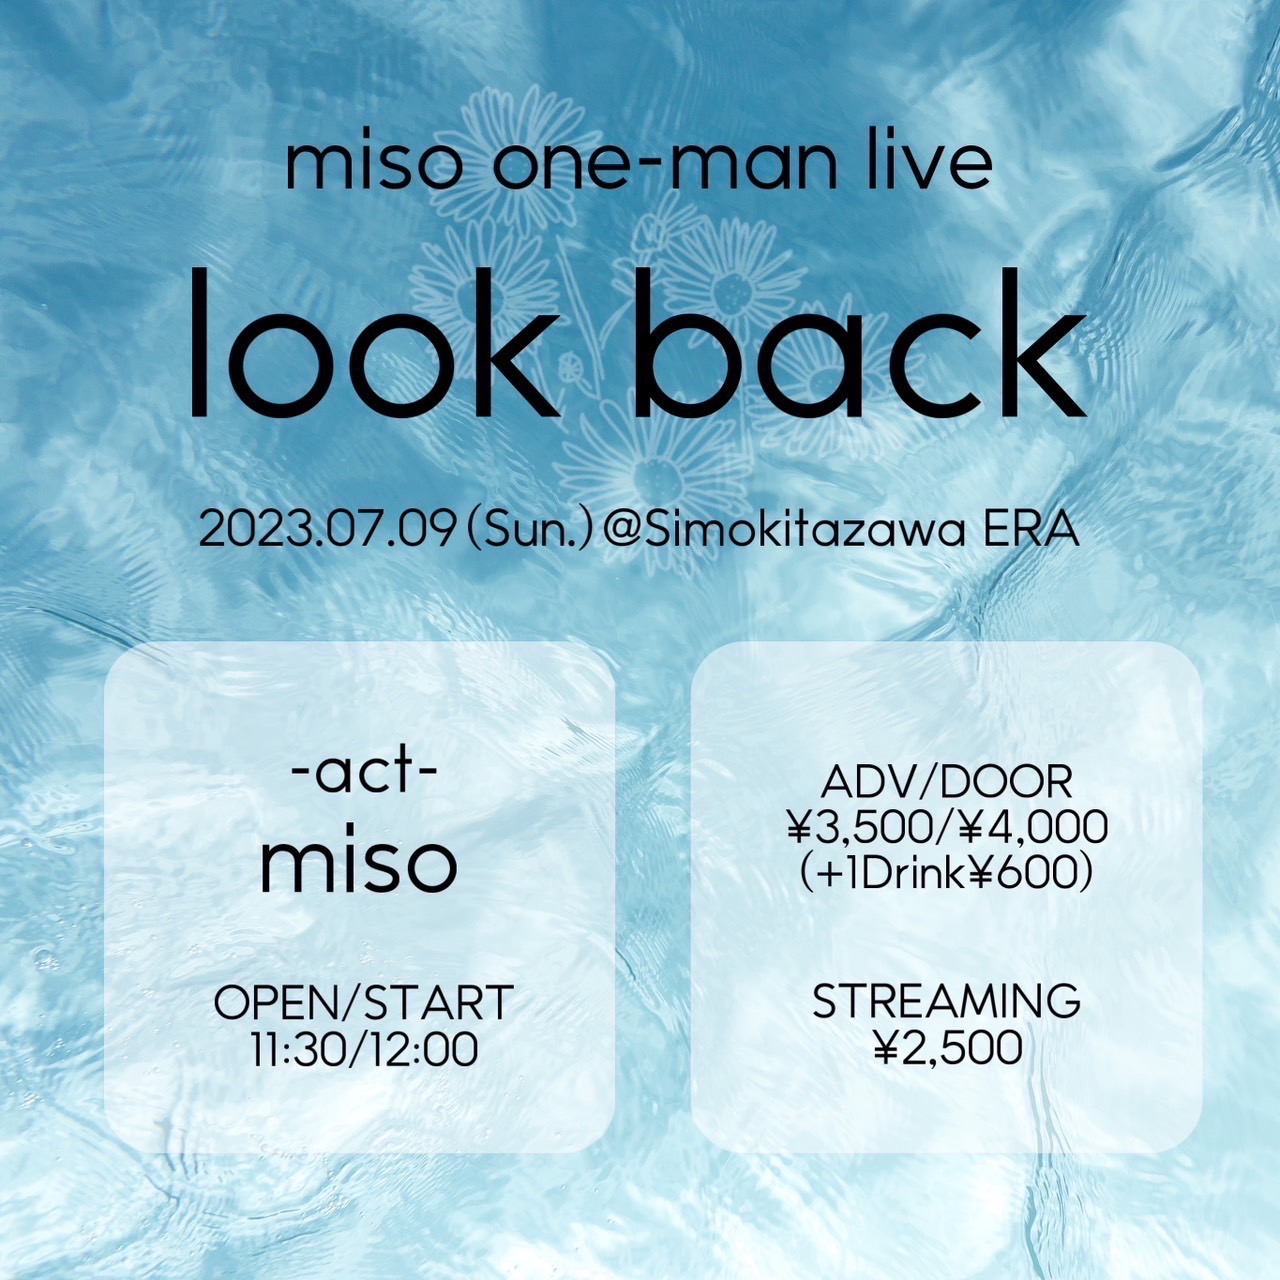 miso one-man live『look back』